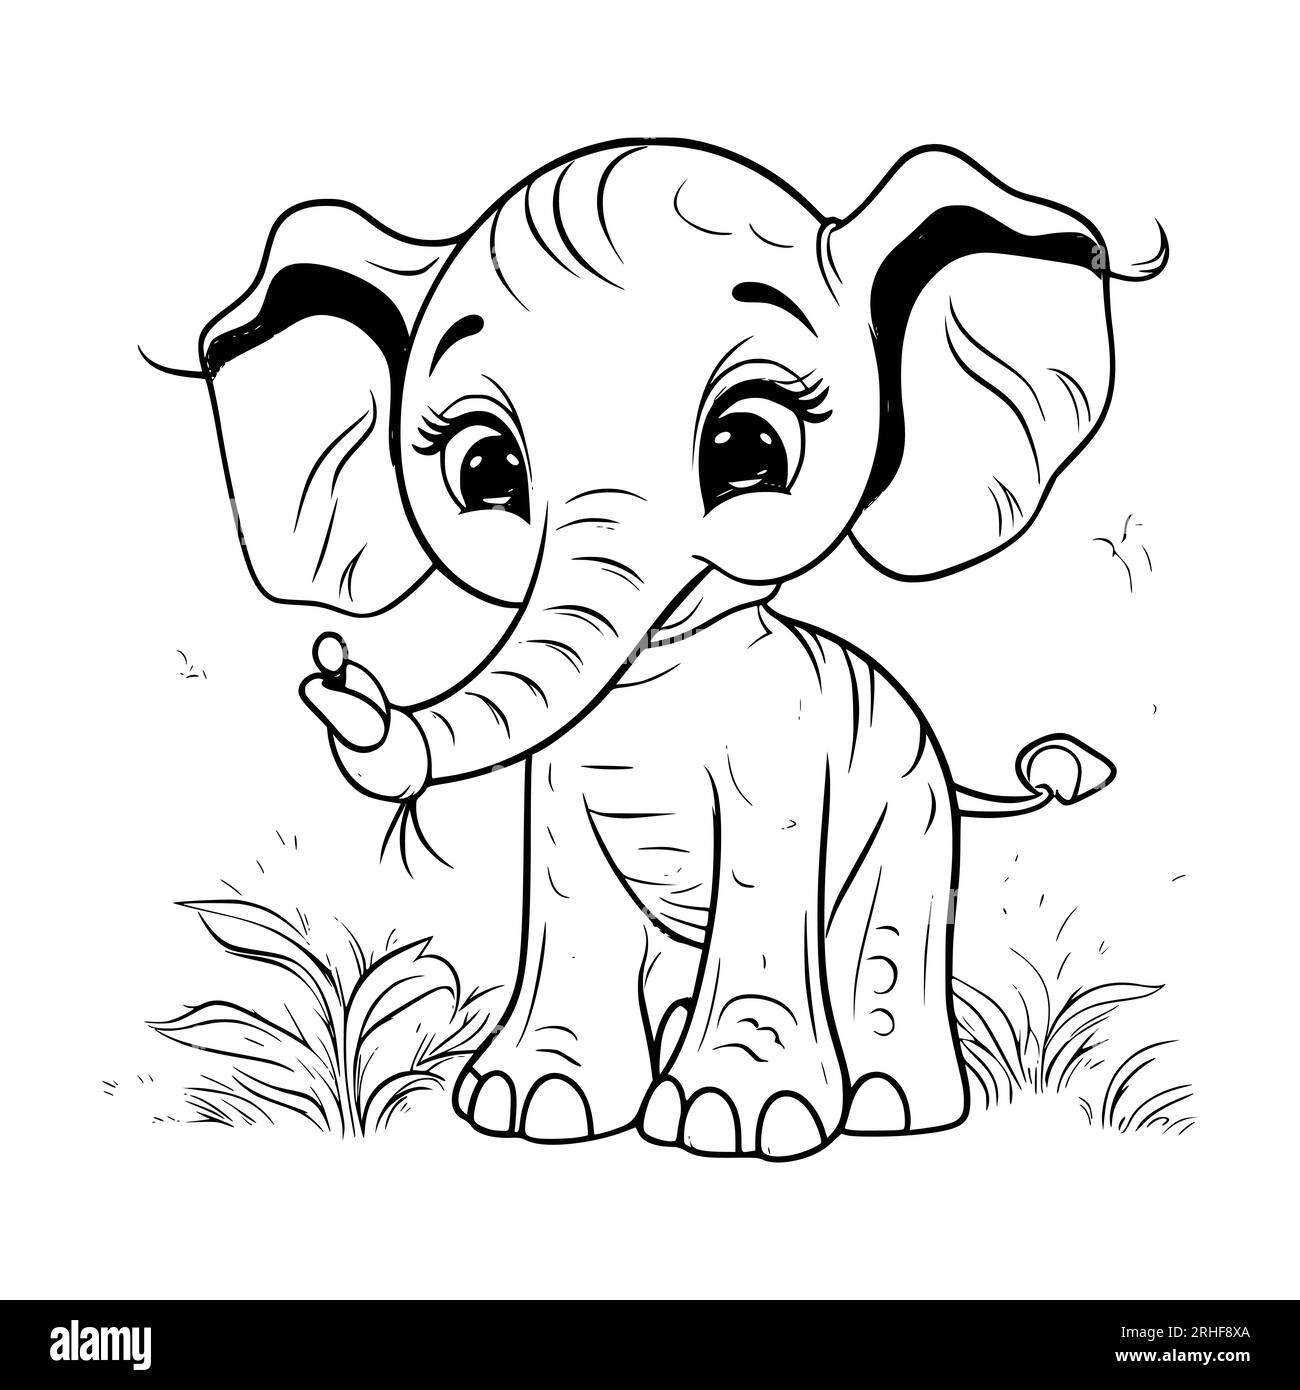 Baby Elephant Coloring Page Drawing For Kids Stock Vector